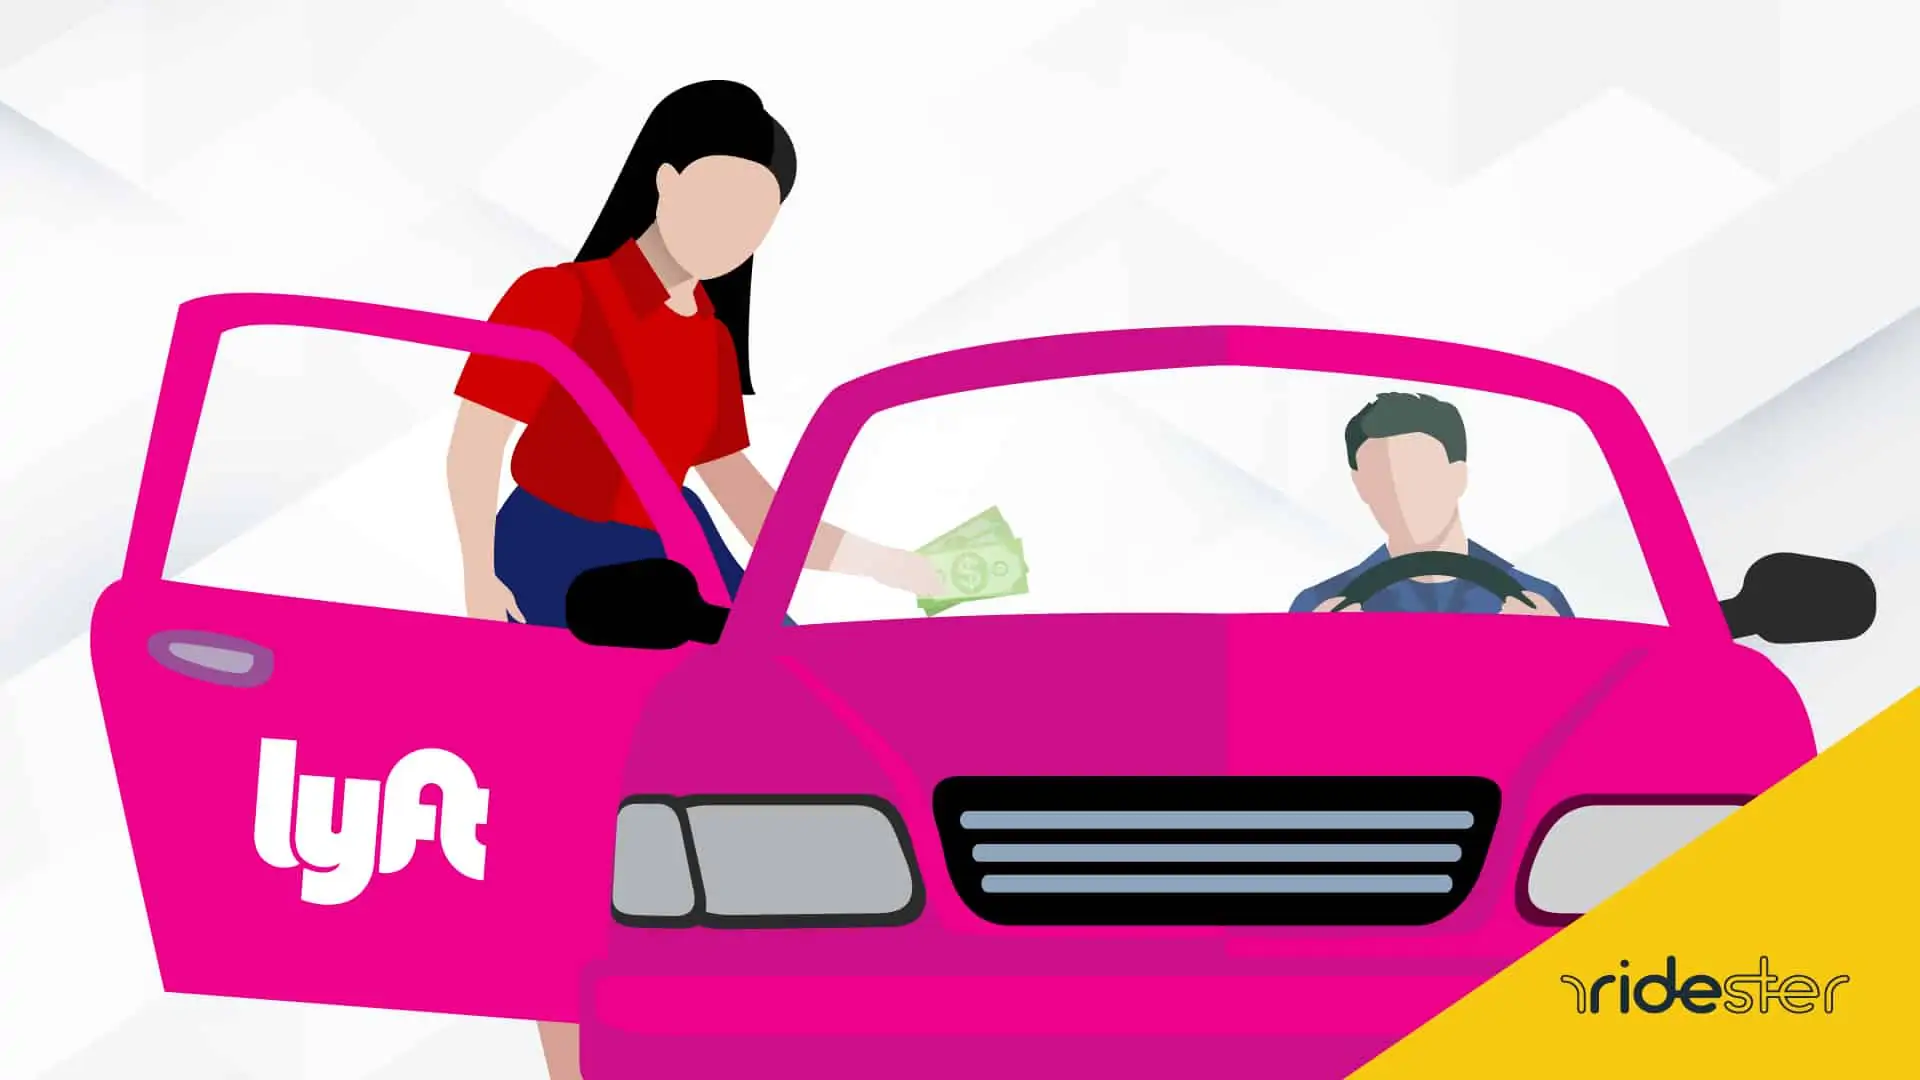 a vector graphic of a woman handing a lyft driver lyft tipping money through the window of the car after a ride